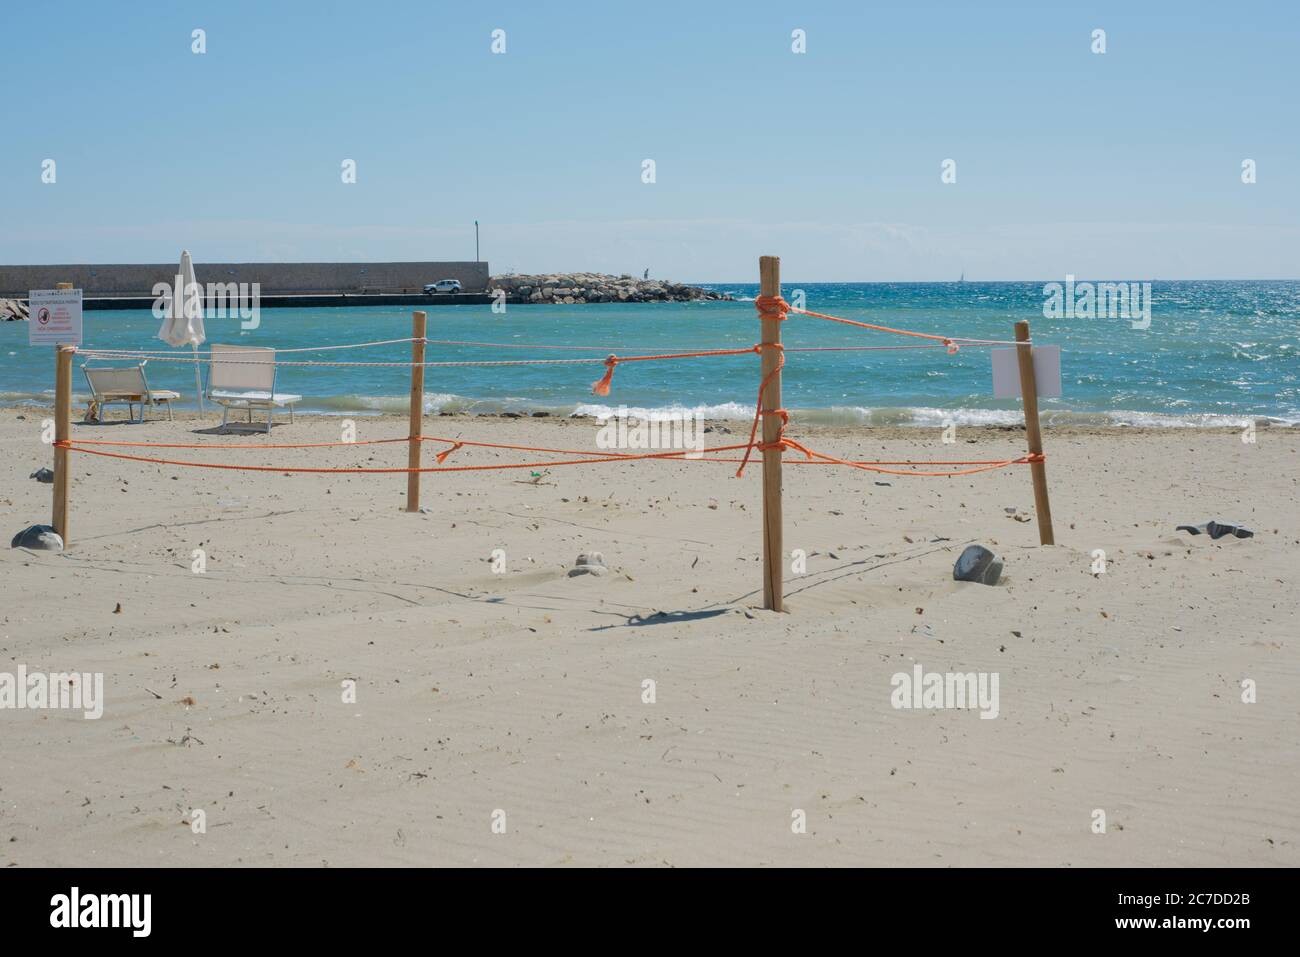 A turtle nest found on the beach of Casal Velino Marina in the province of Salerno, Italy. Stock Photo